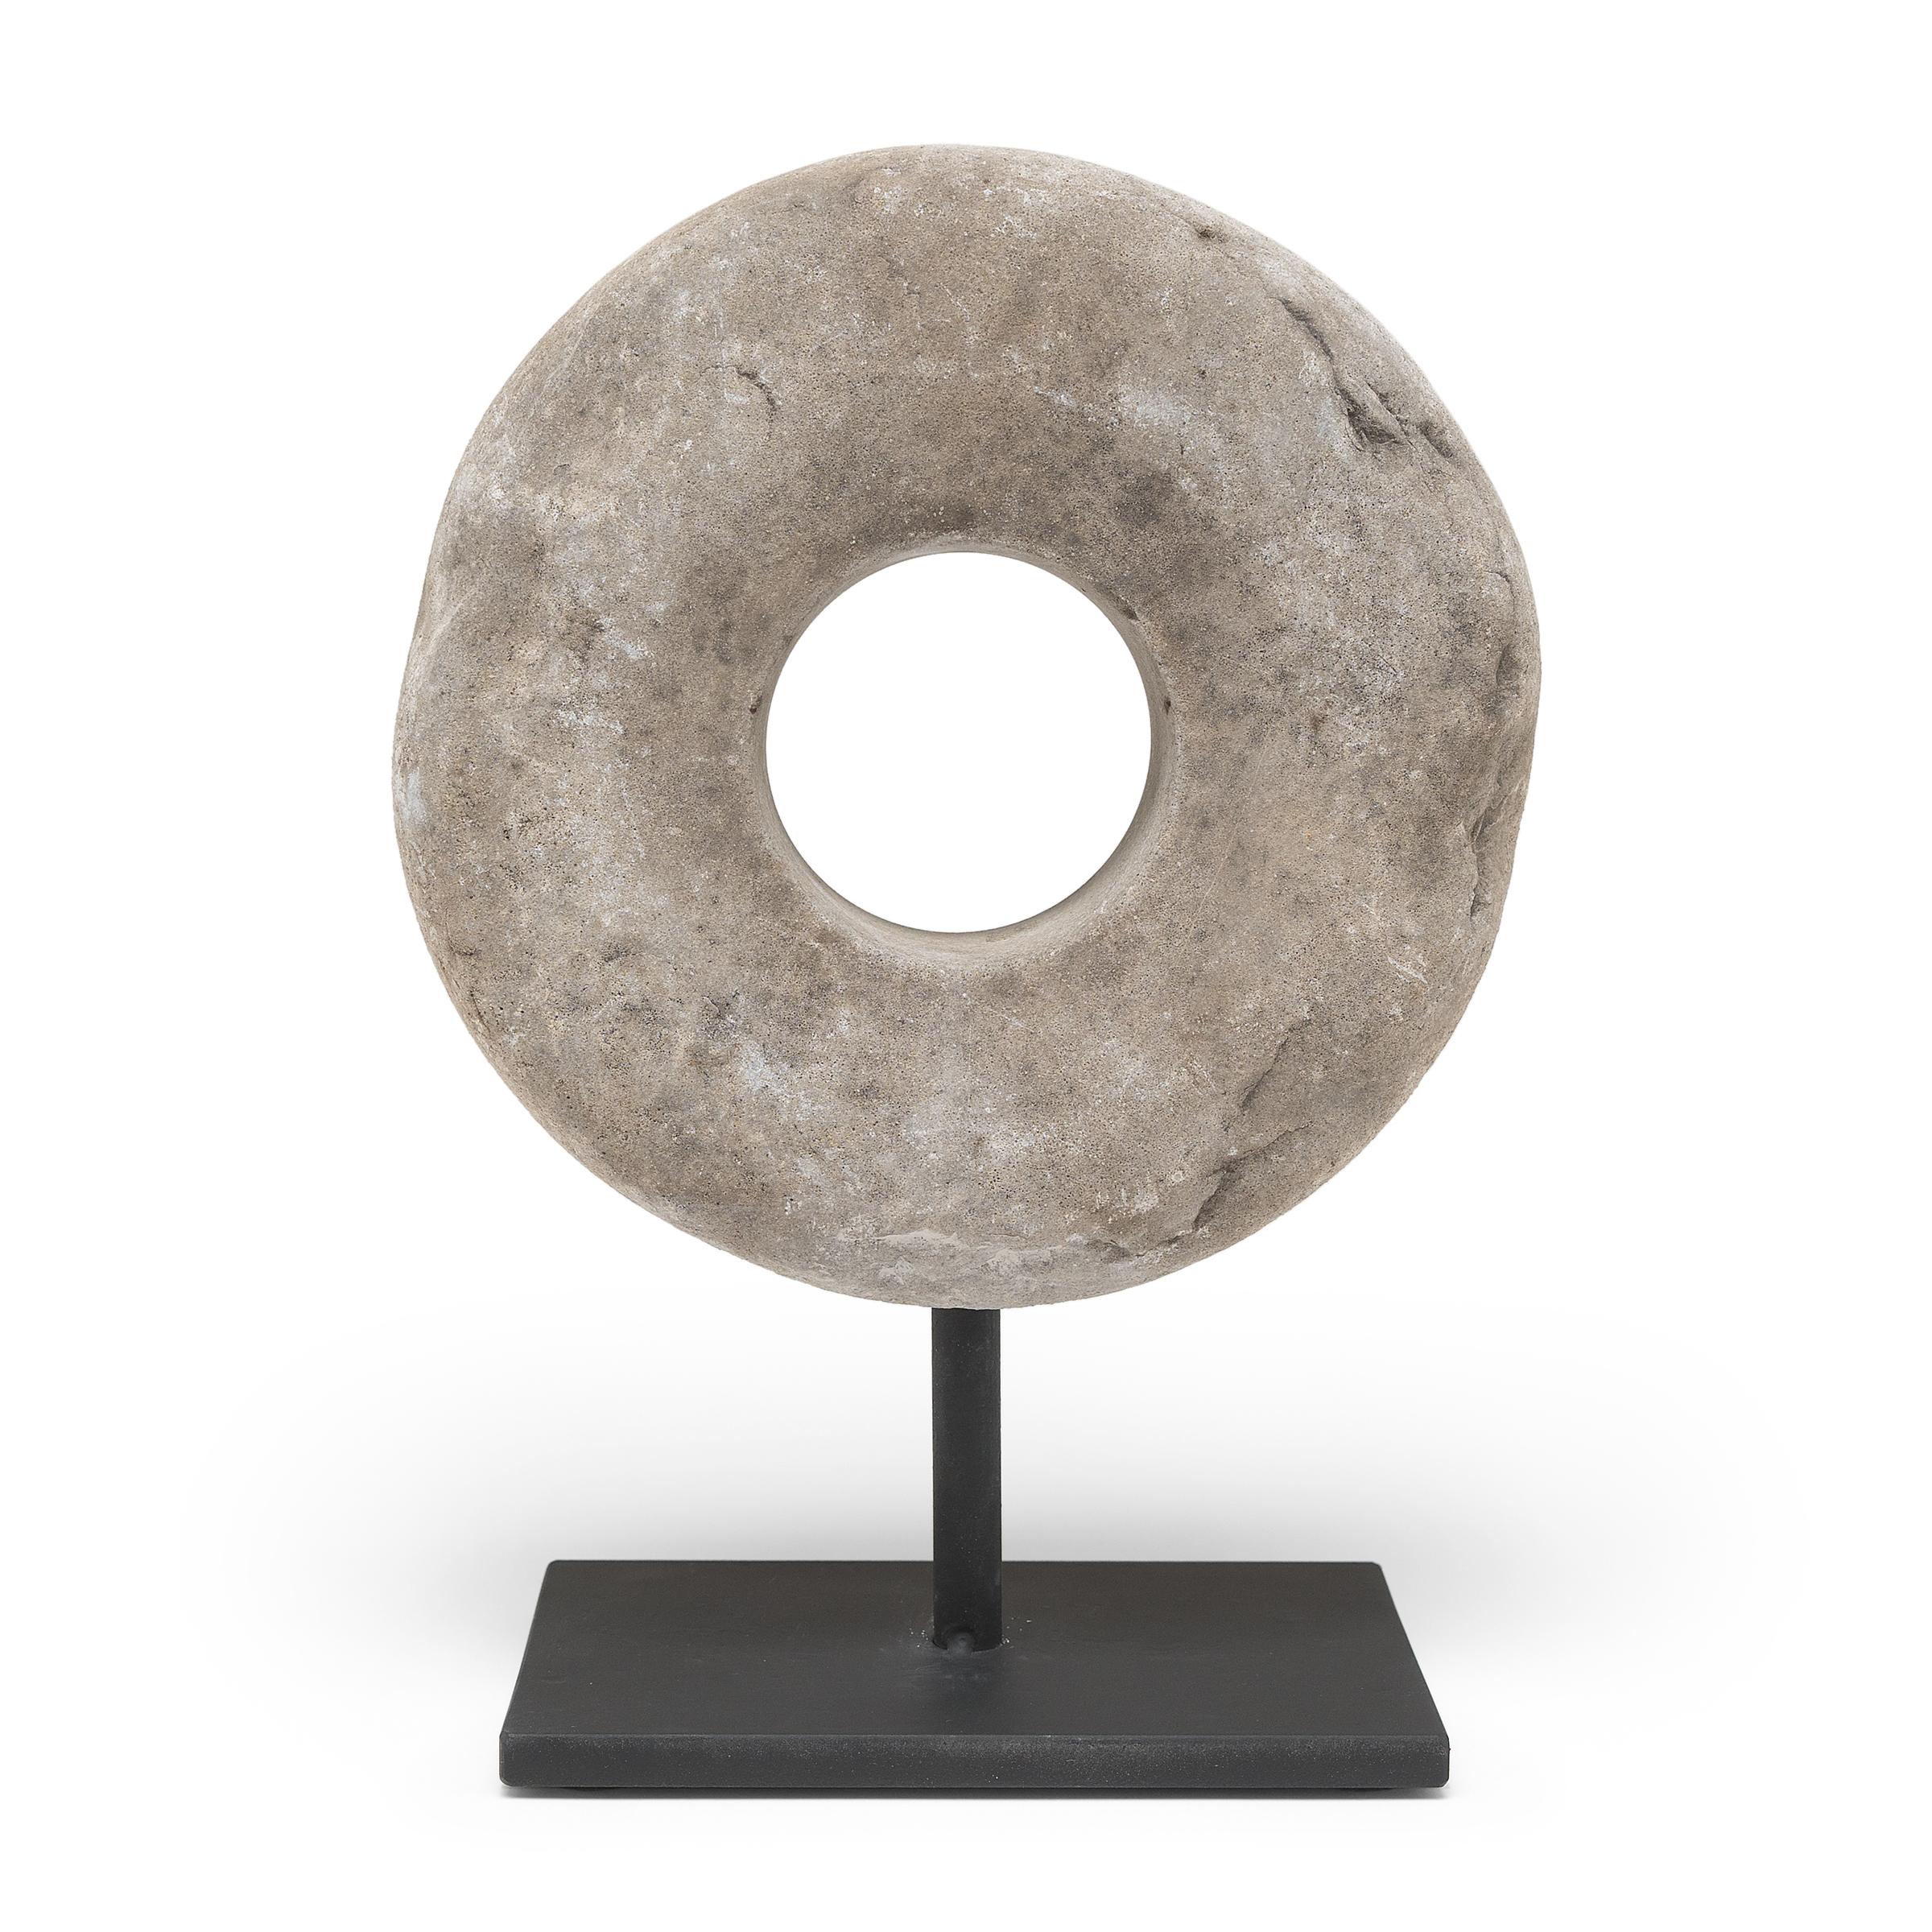 Organic Modern Chinese Prosperity Stone Disc, c. 1900 For Sale